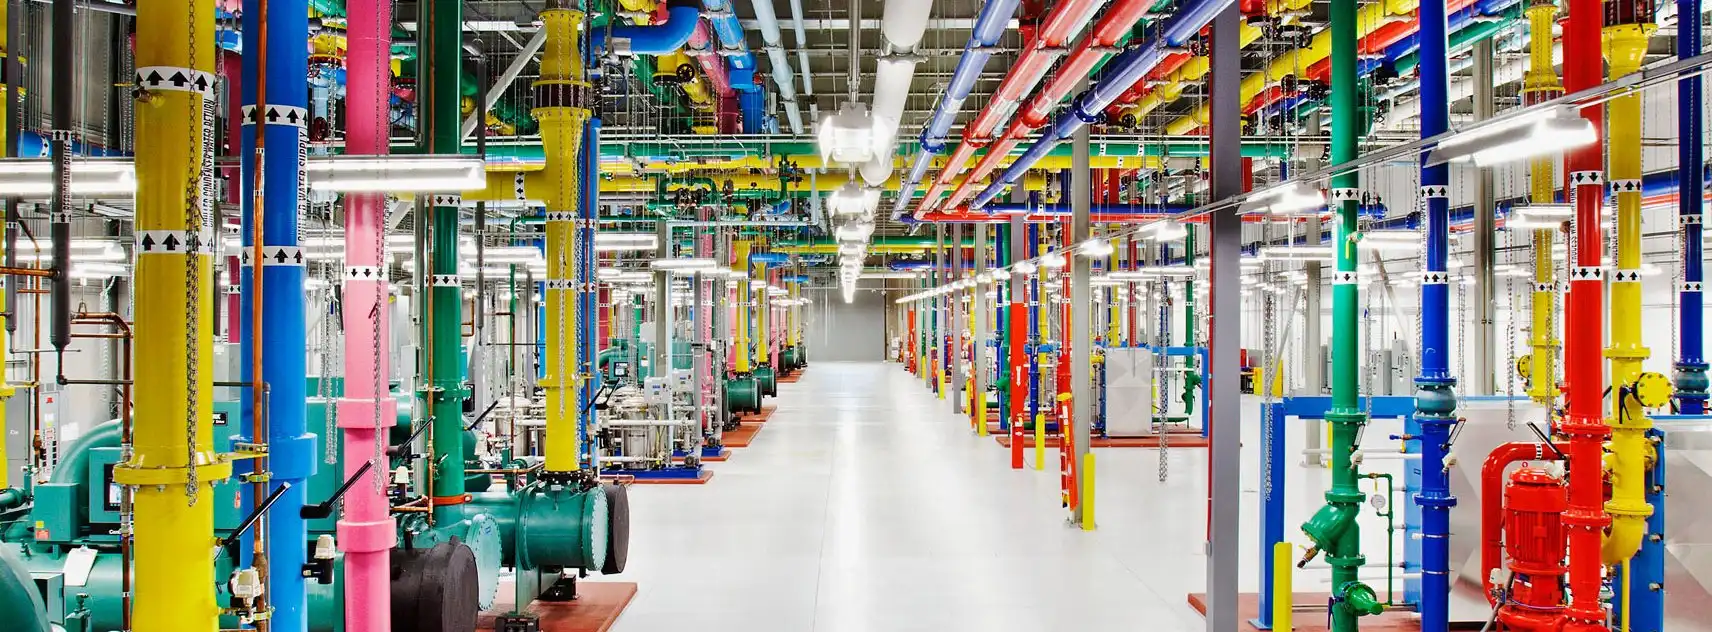 Article | DeepMind AI Reduces Google Data Centre Cooling Bill by 40%